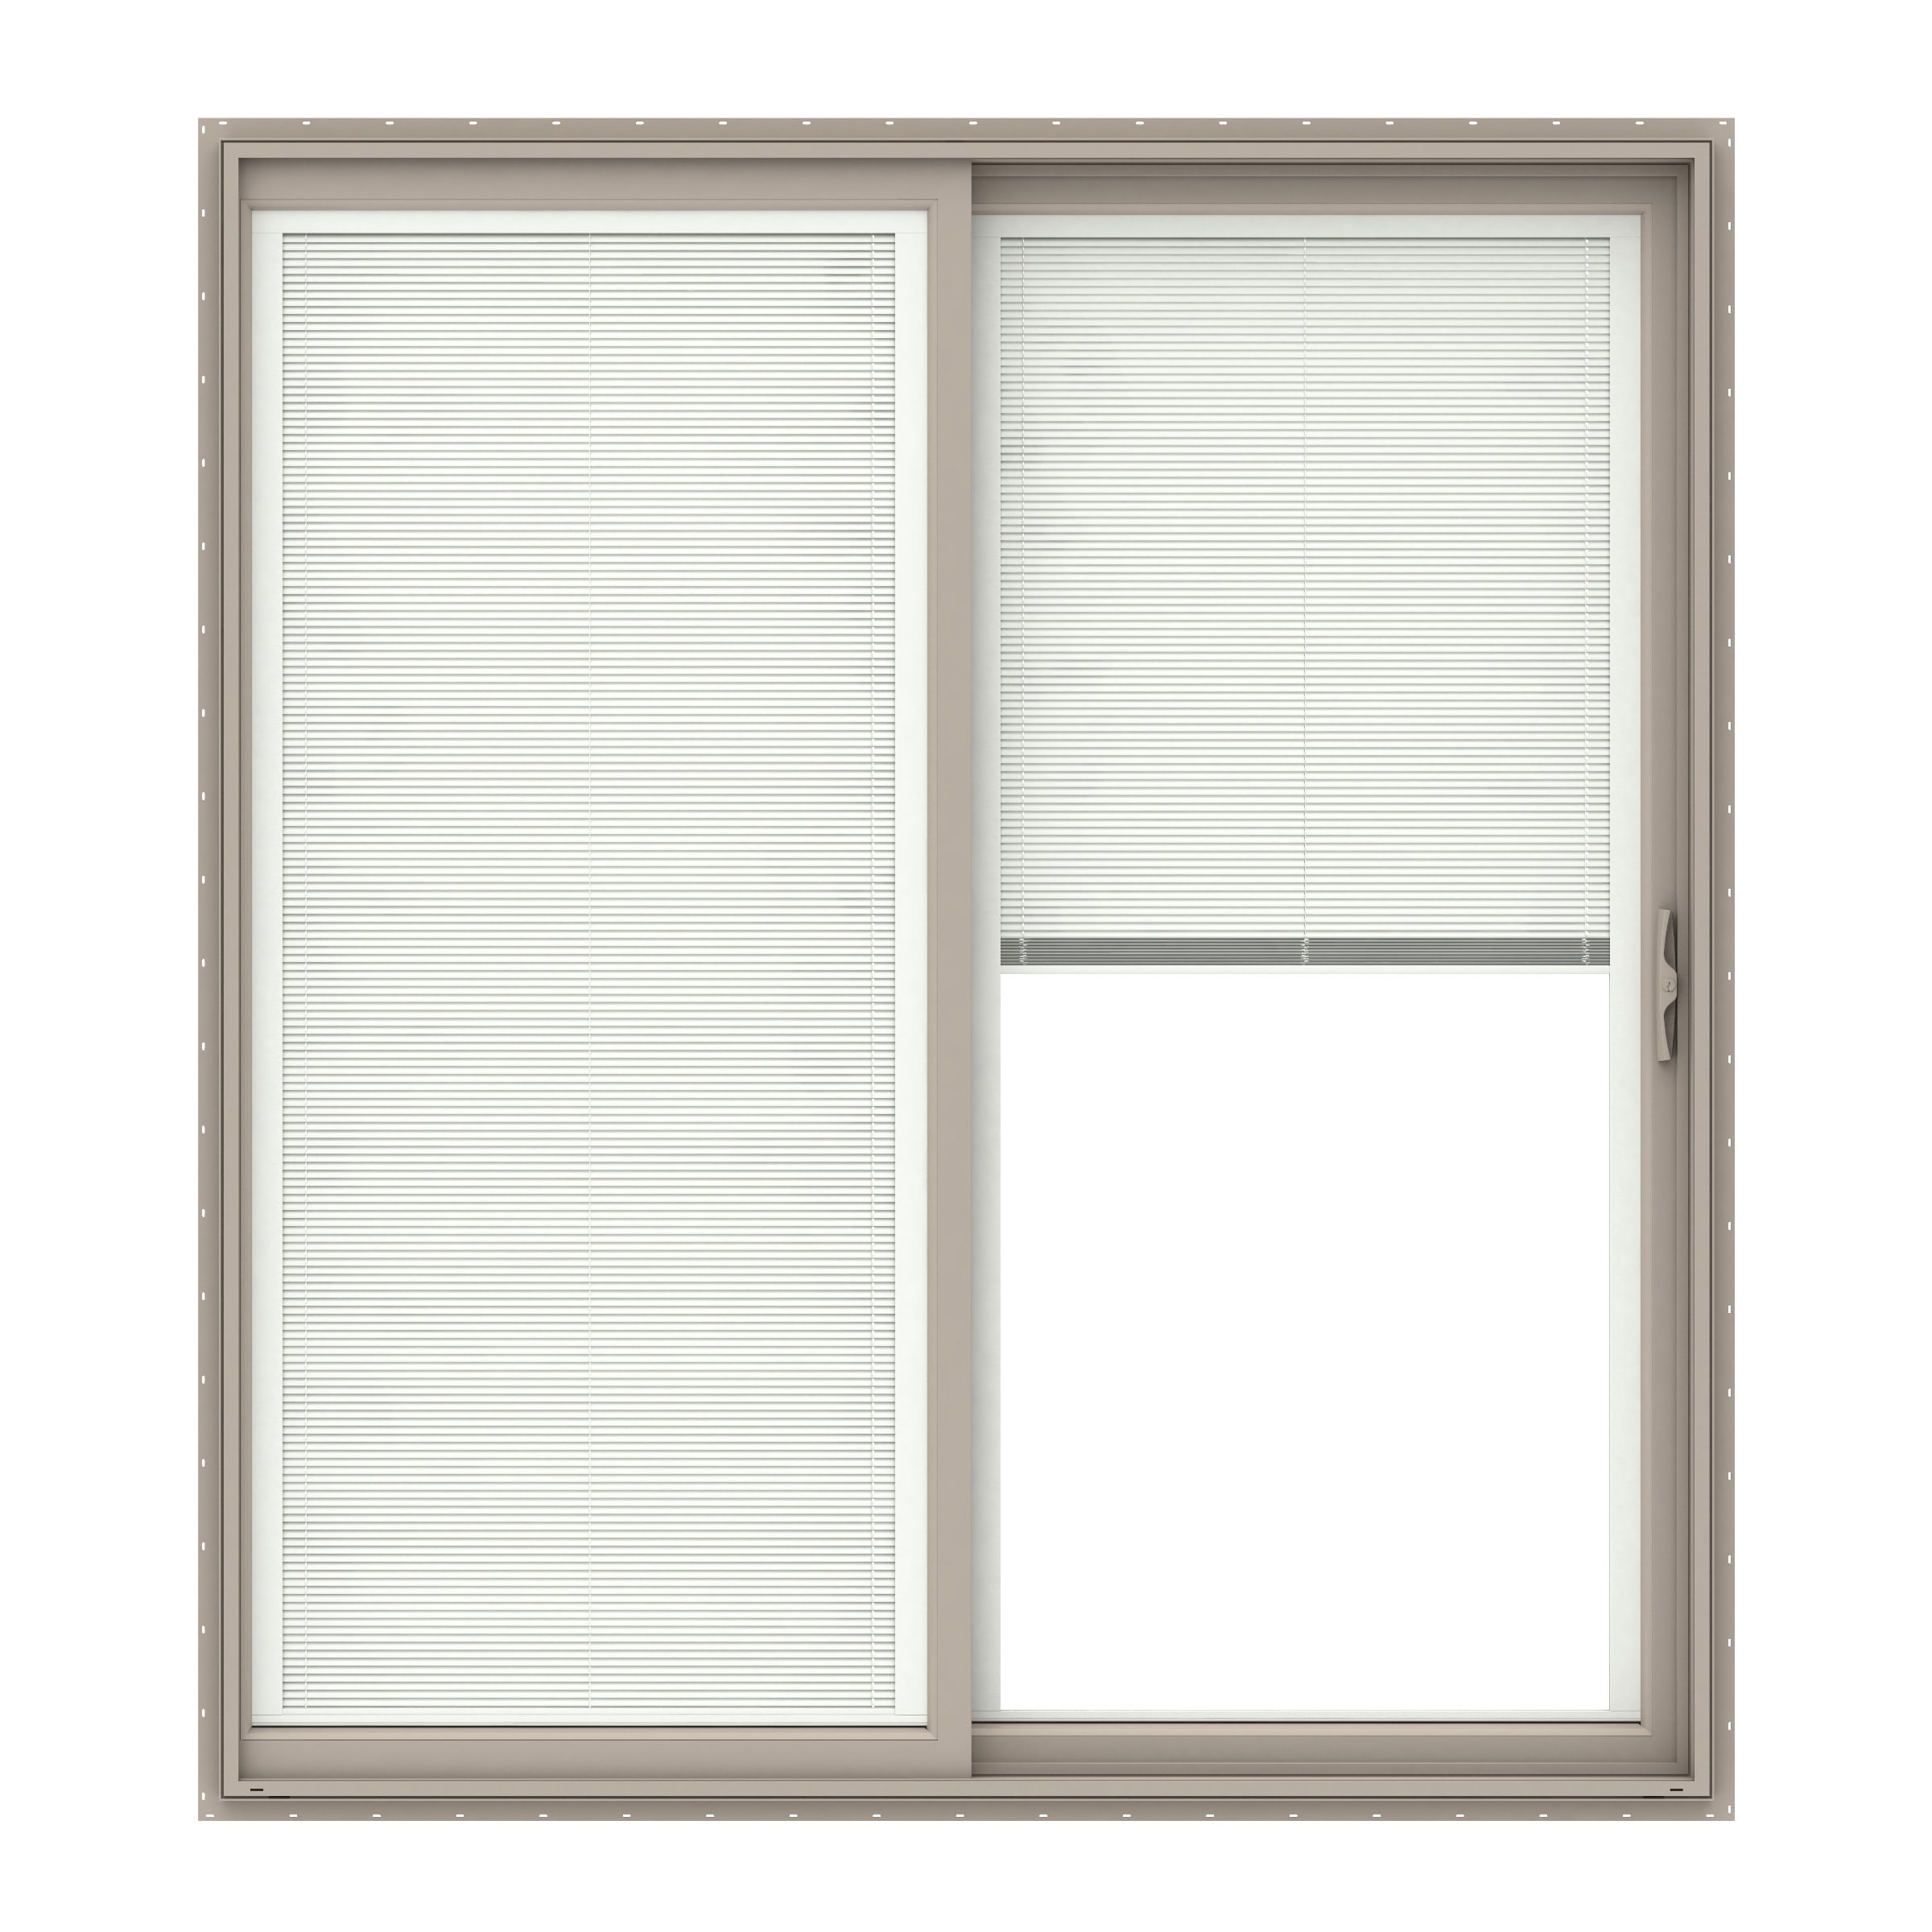 Pella 150 Series West 72-in x 80-in Low-e Argon Blinds Between The Glass Fossil Vinyl Sliding Right-Hand Sliding Double Patio Door in Brown/Tan -  1000011528